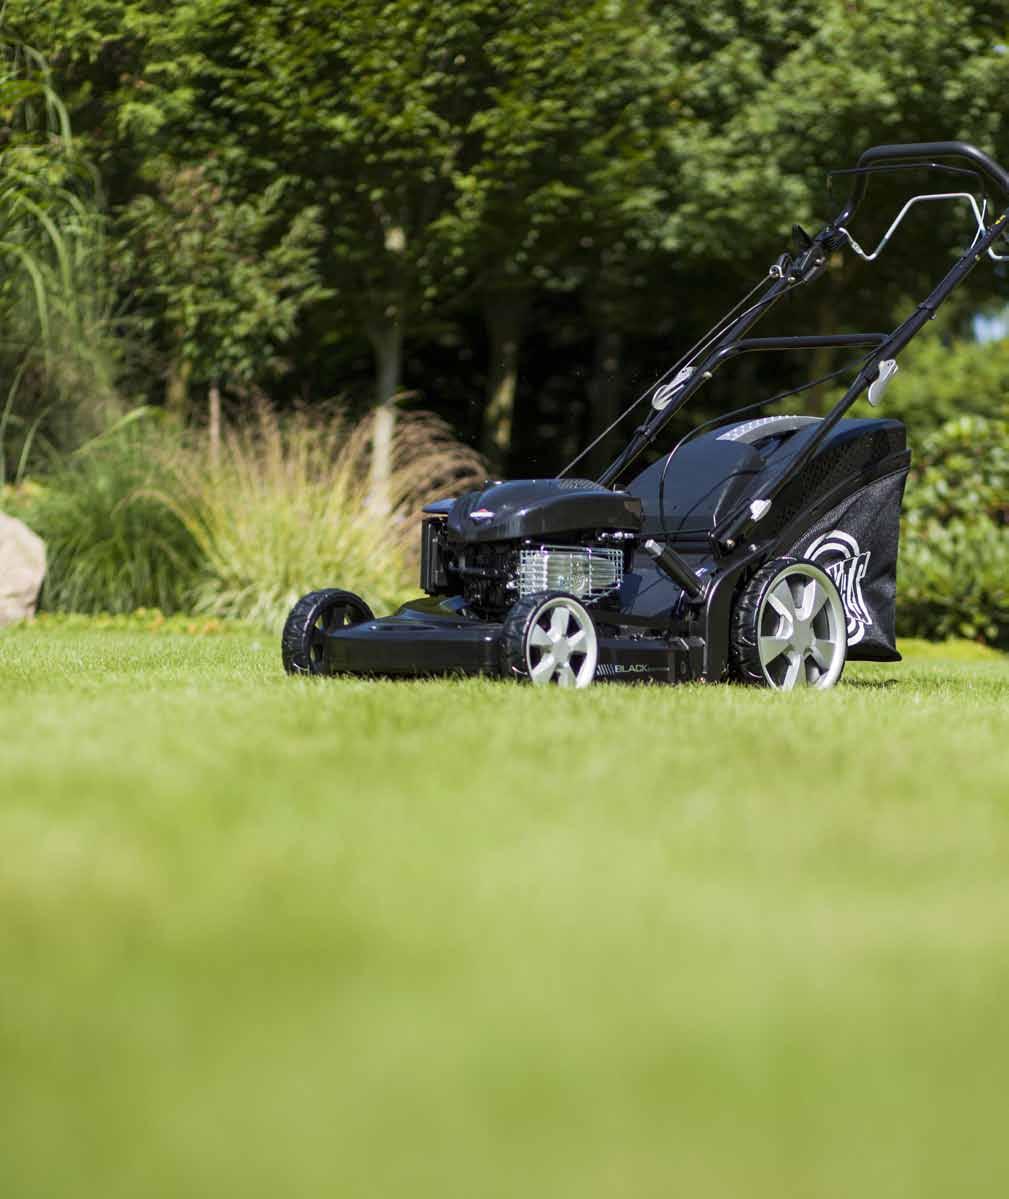 High end mowers This range of lawn mowers are designed for demanding users who want value for money, but who also make demands to their machine.